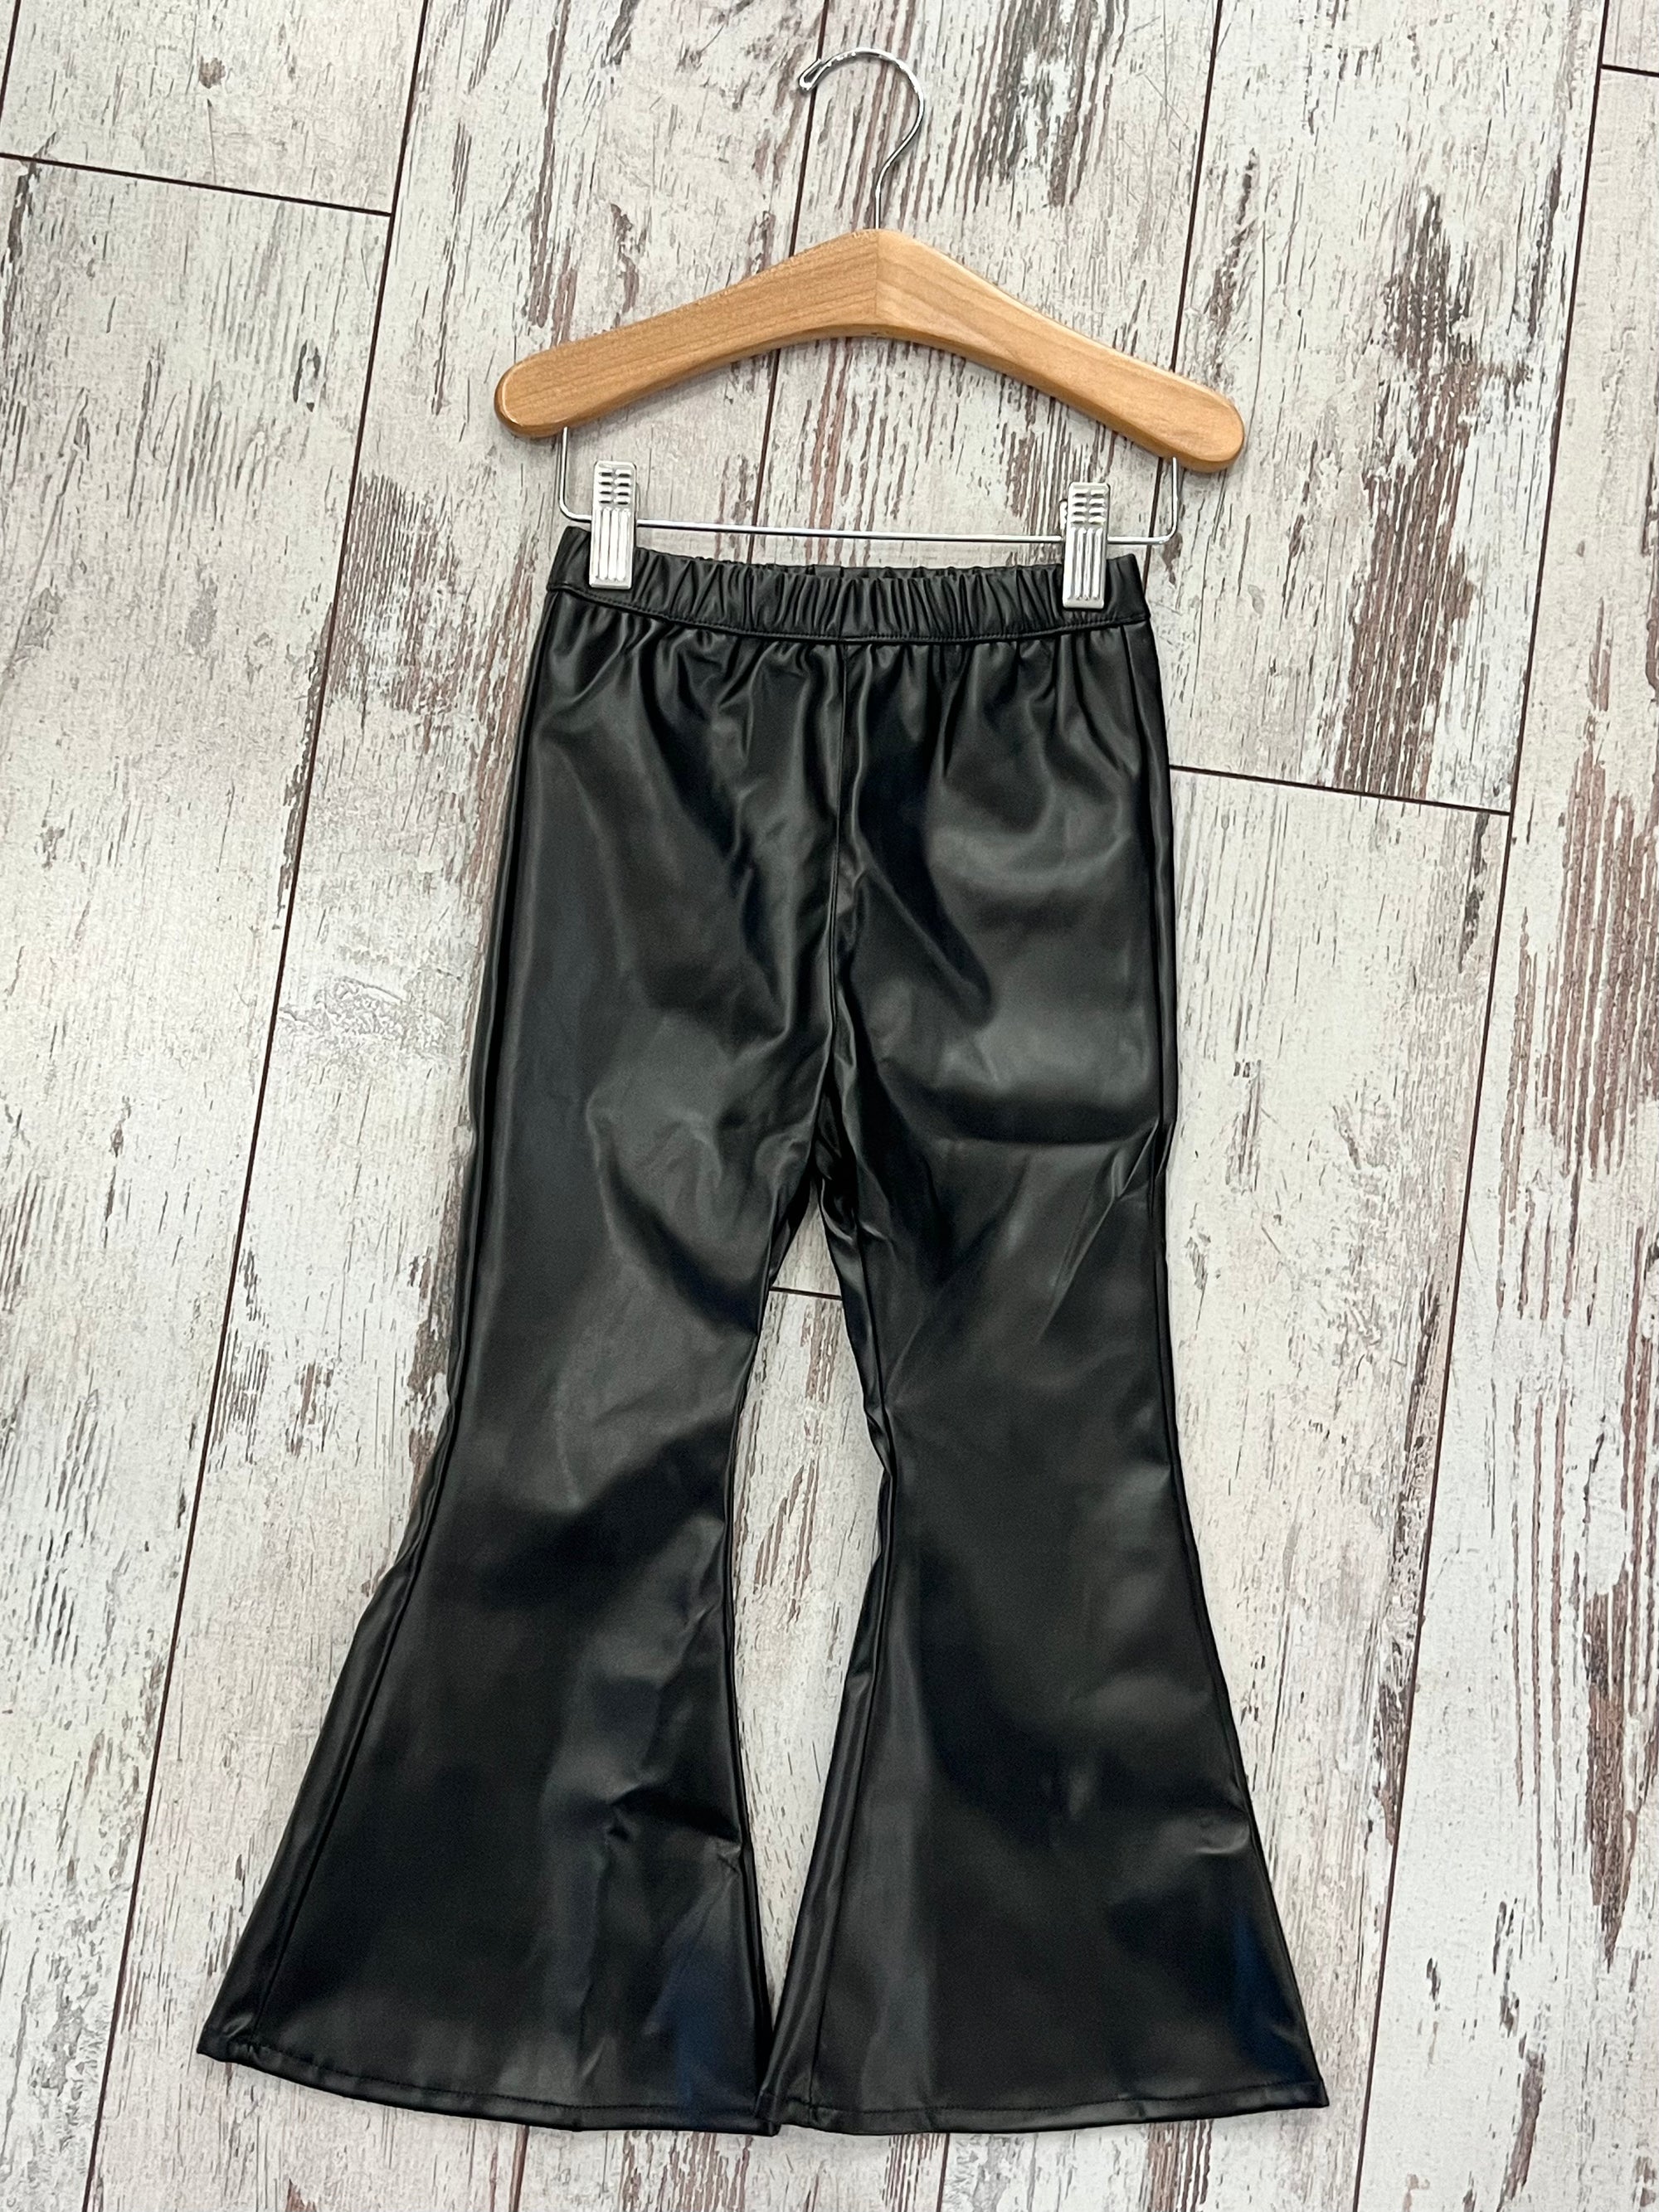 Faux Leather Bell Bottom Pants